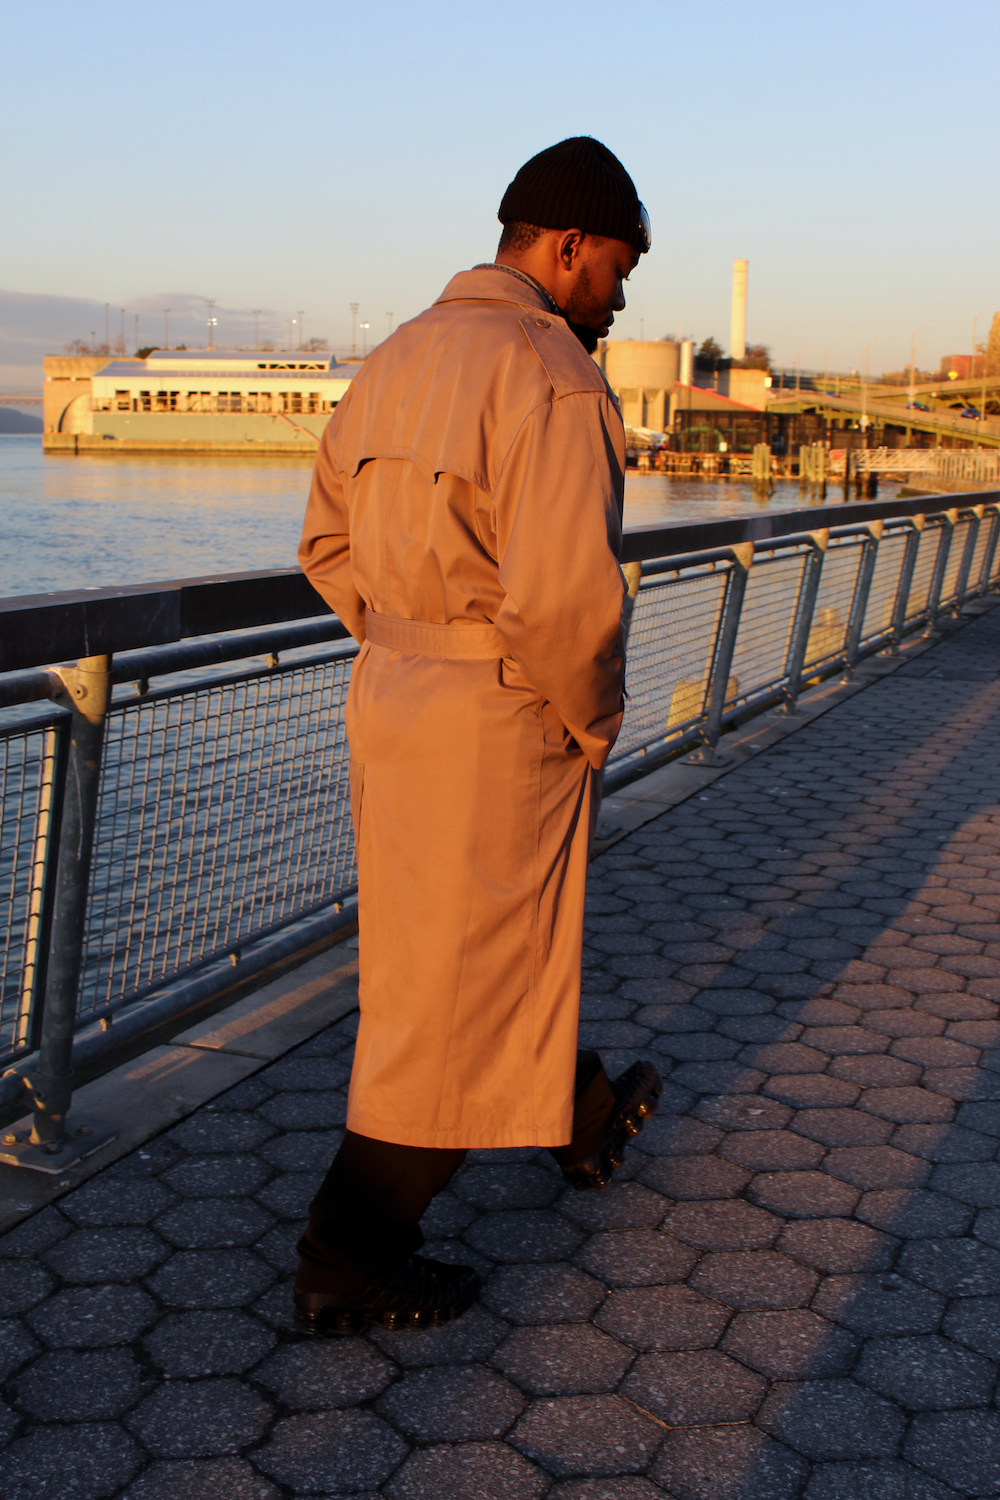 VINTAGE CHRISTIAN DIOR TRENCH COAT — quell